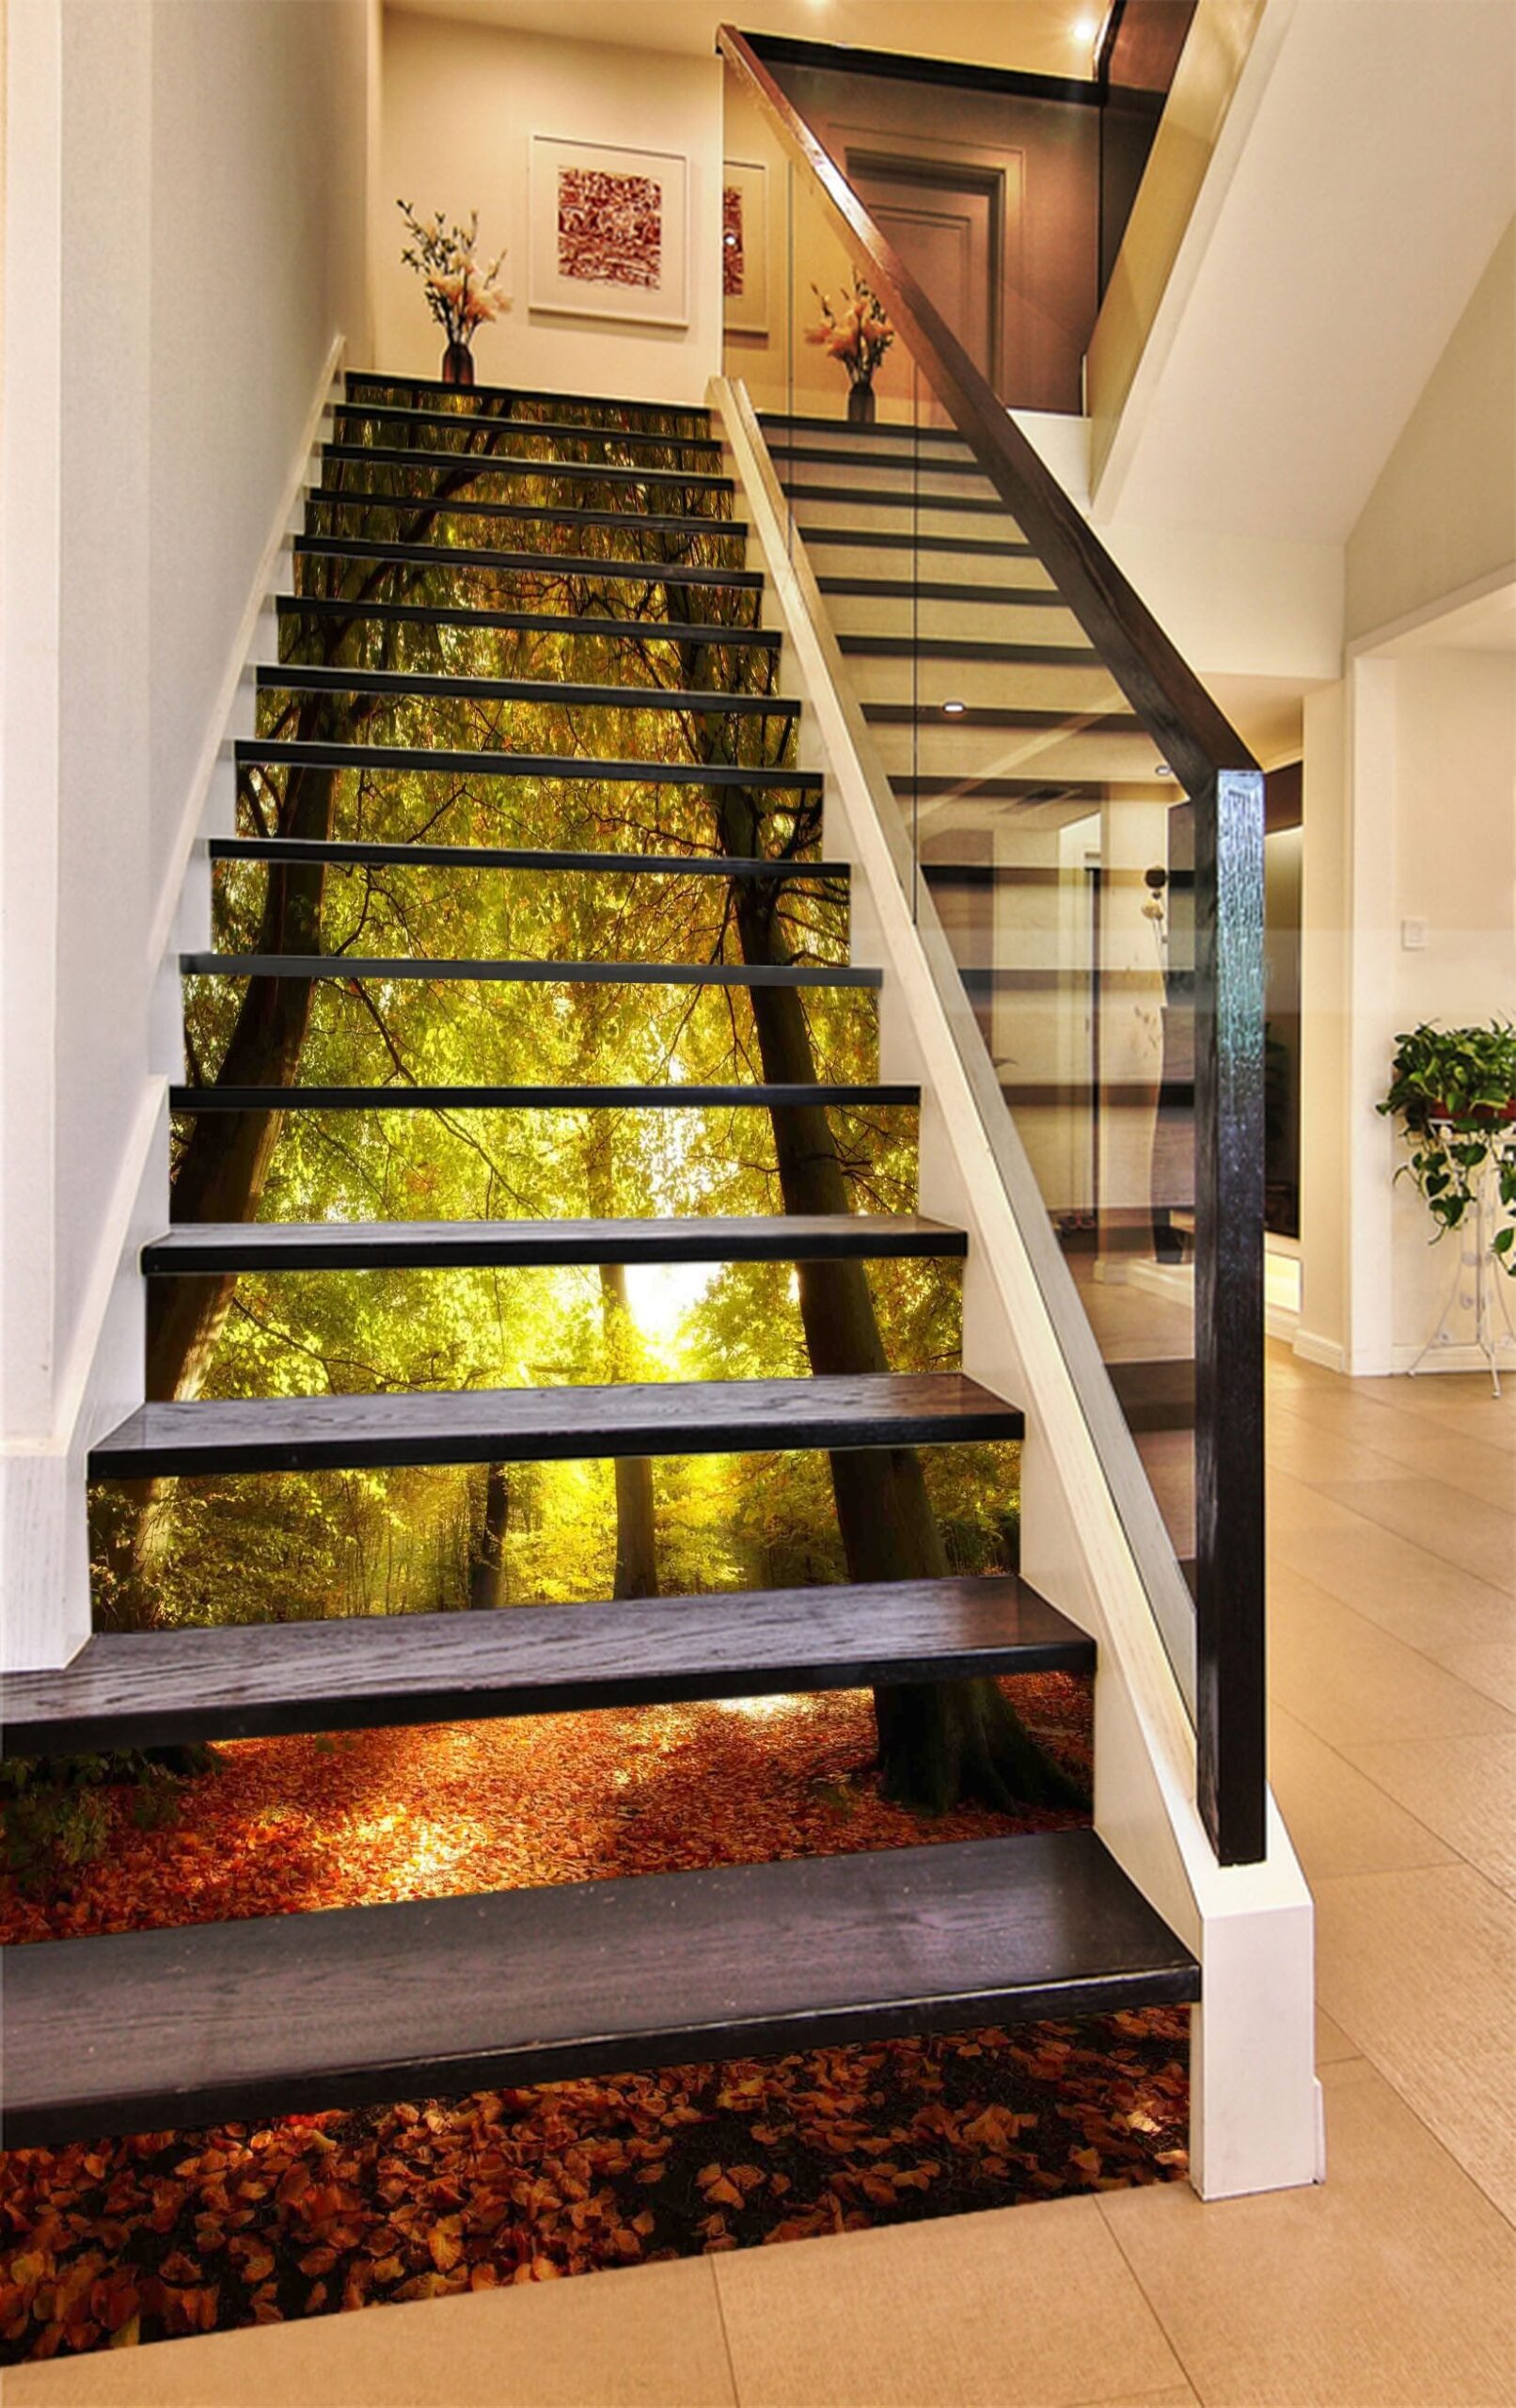 3D Forest Sunshine 1198 Stair Risers